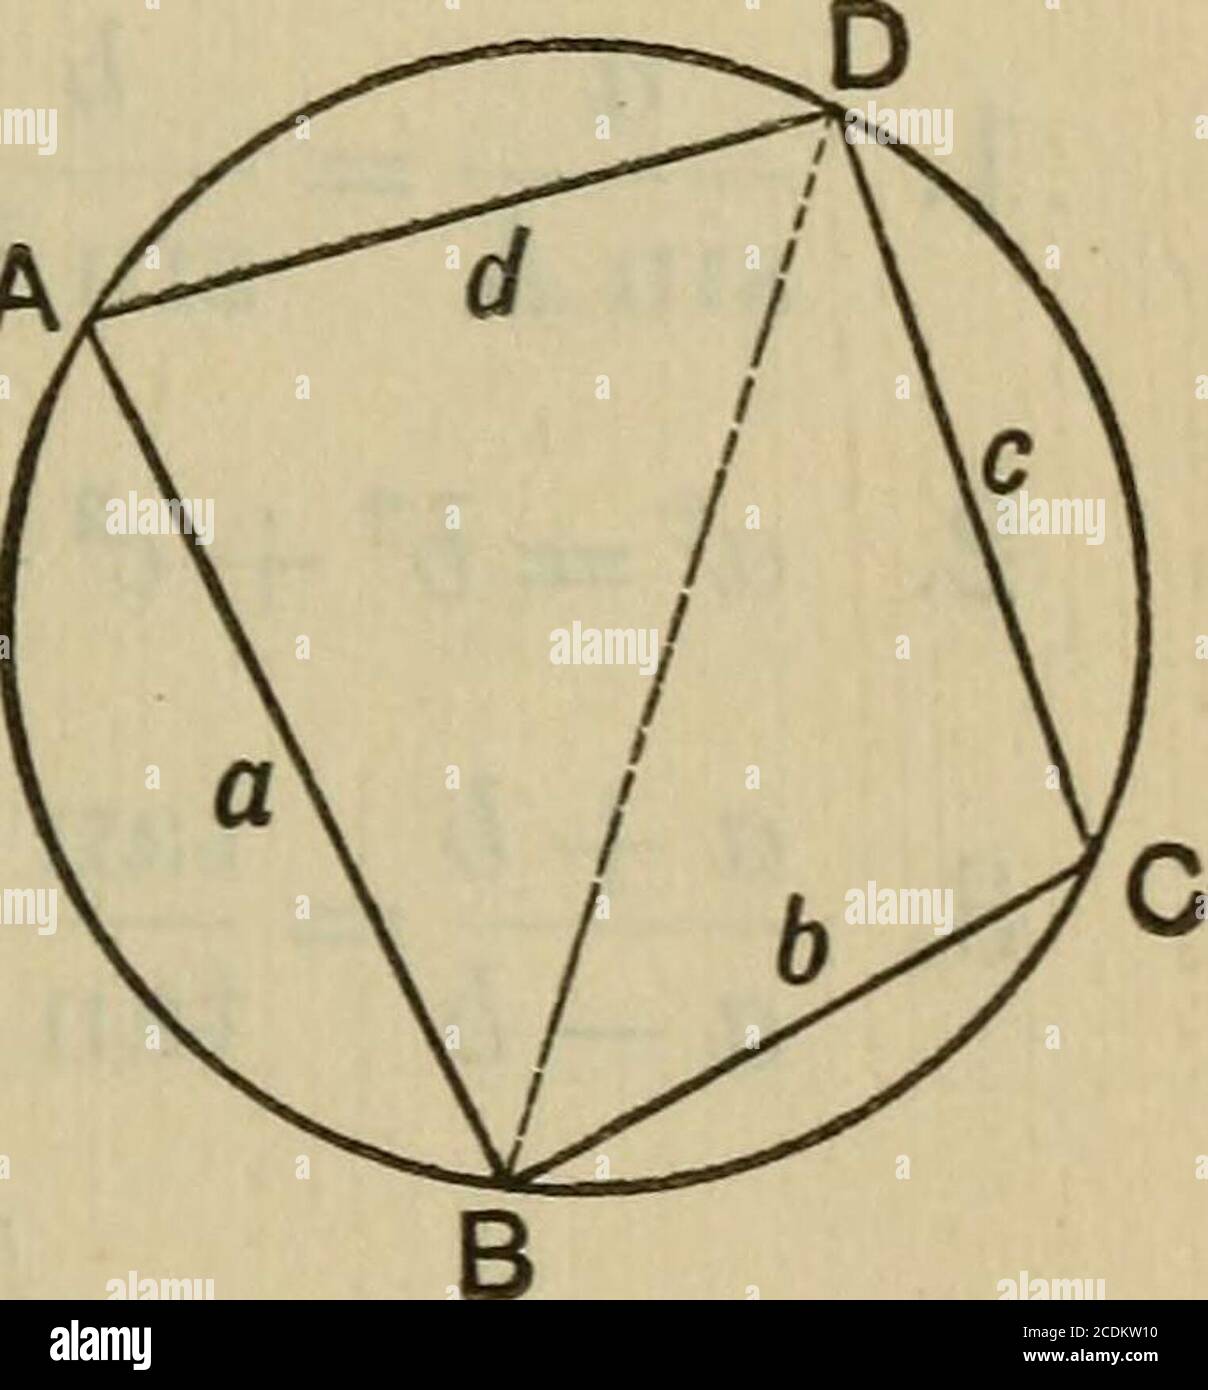 . A treatise on plane and spherical trigonometry, and its applications to astronomy and geodesy, with numerous examples . ABC when (1) a = 4, 6 = 10 ft., C = 30°. Arts. 10 sq. ft. (2) 6=5, c = 20 inches, A = 60°. 43.3 sq. in. (3) a = 13, b = 14, c = 15 chains. 84 sq. chains. A T&gt; 1111 4. Prove - = —-| 1 5. Prove r = g-g-in^Bsin^C cos^-A EXAMPLES. 157 6. Prove that the area of the triangle ABC is representedby each of the three expressions: 2 R2 sin A sin B sin C, rs, and Br (sin A + sin B + sin C). 7. If A = 60°, a = V3, 6 = V2, prove that the area= i(3+V3). 8. Prove E (sin A + sin B + sin Stock Photo